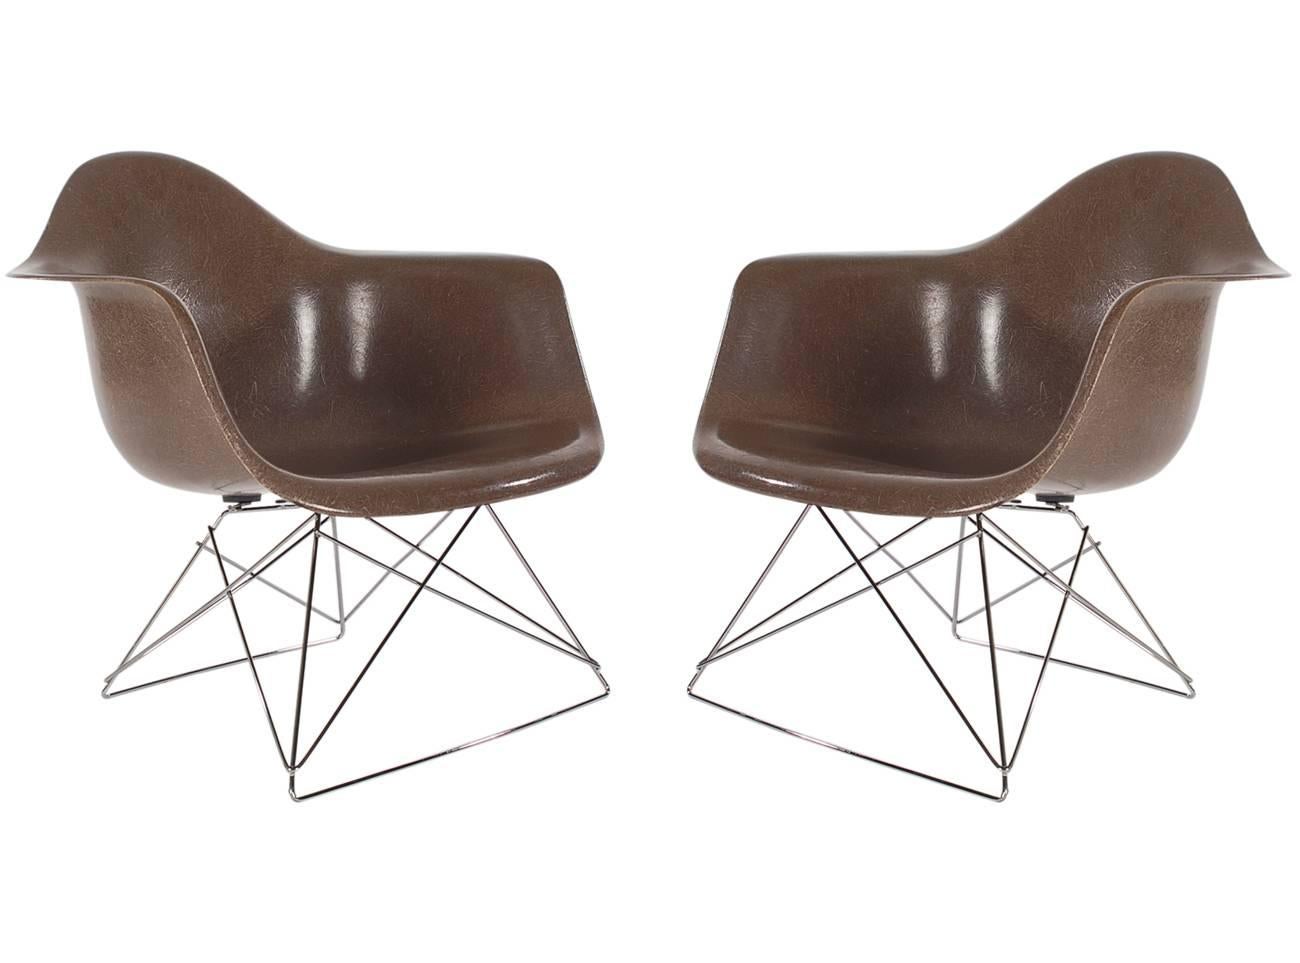 Here we have an iconic design Classic from the Mid-Century Modern period. This vintage fiberglass shell chair was designed by Charles Eames and produced by Herman Miller, circa 1972. In a very hard to find color, chocolate brown. The chair seats are